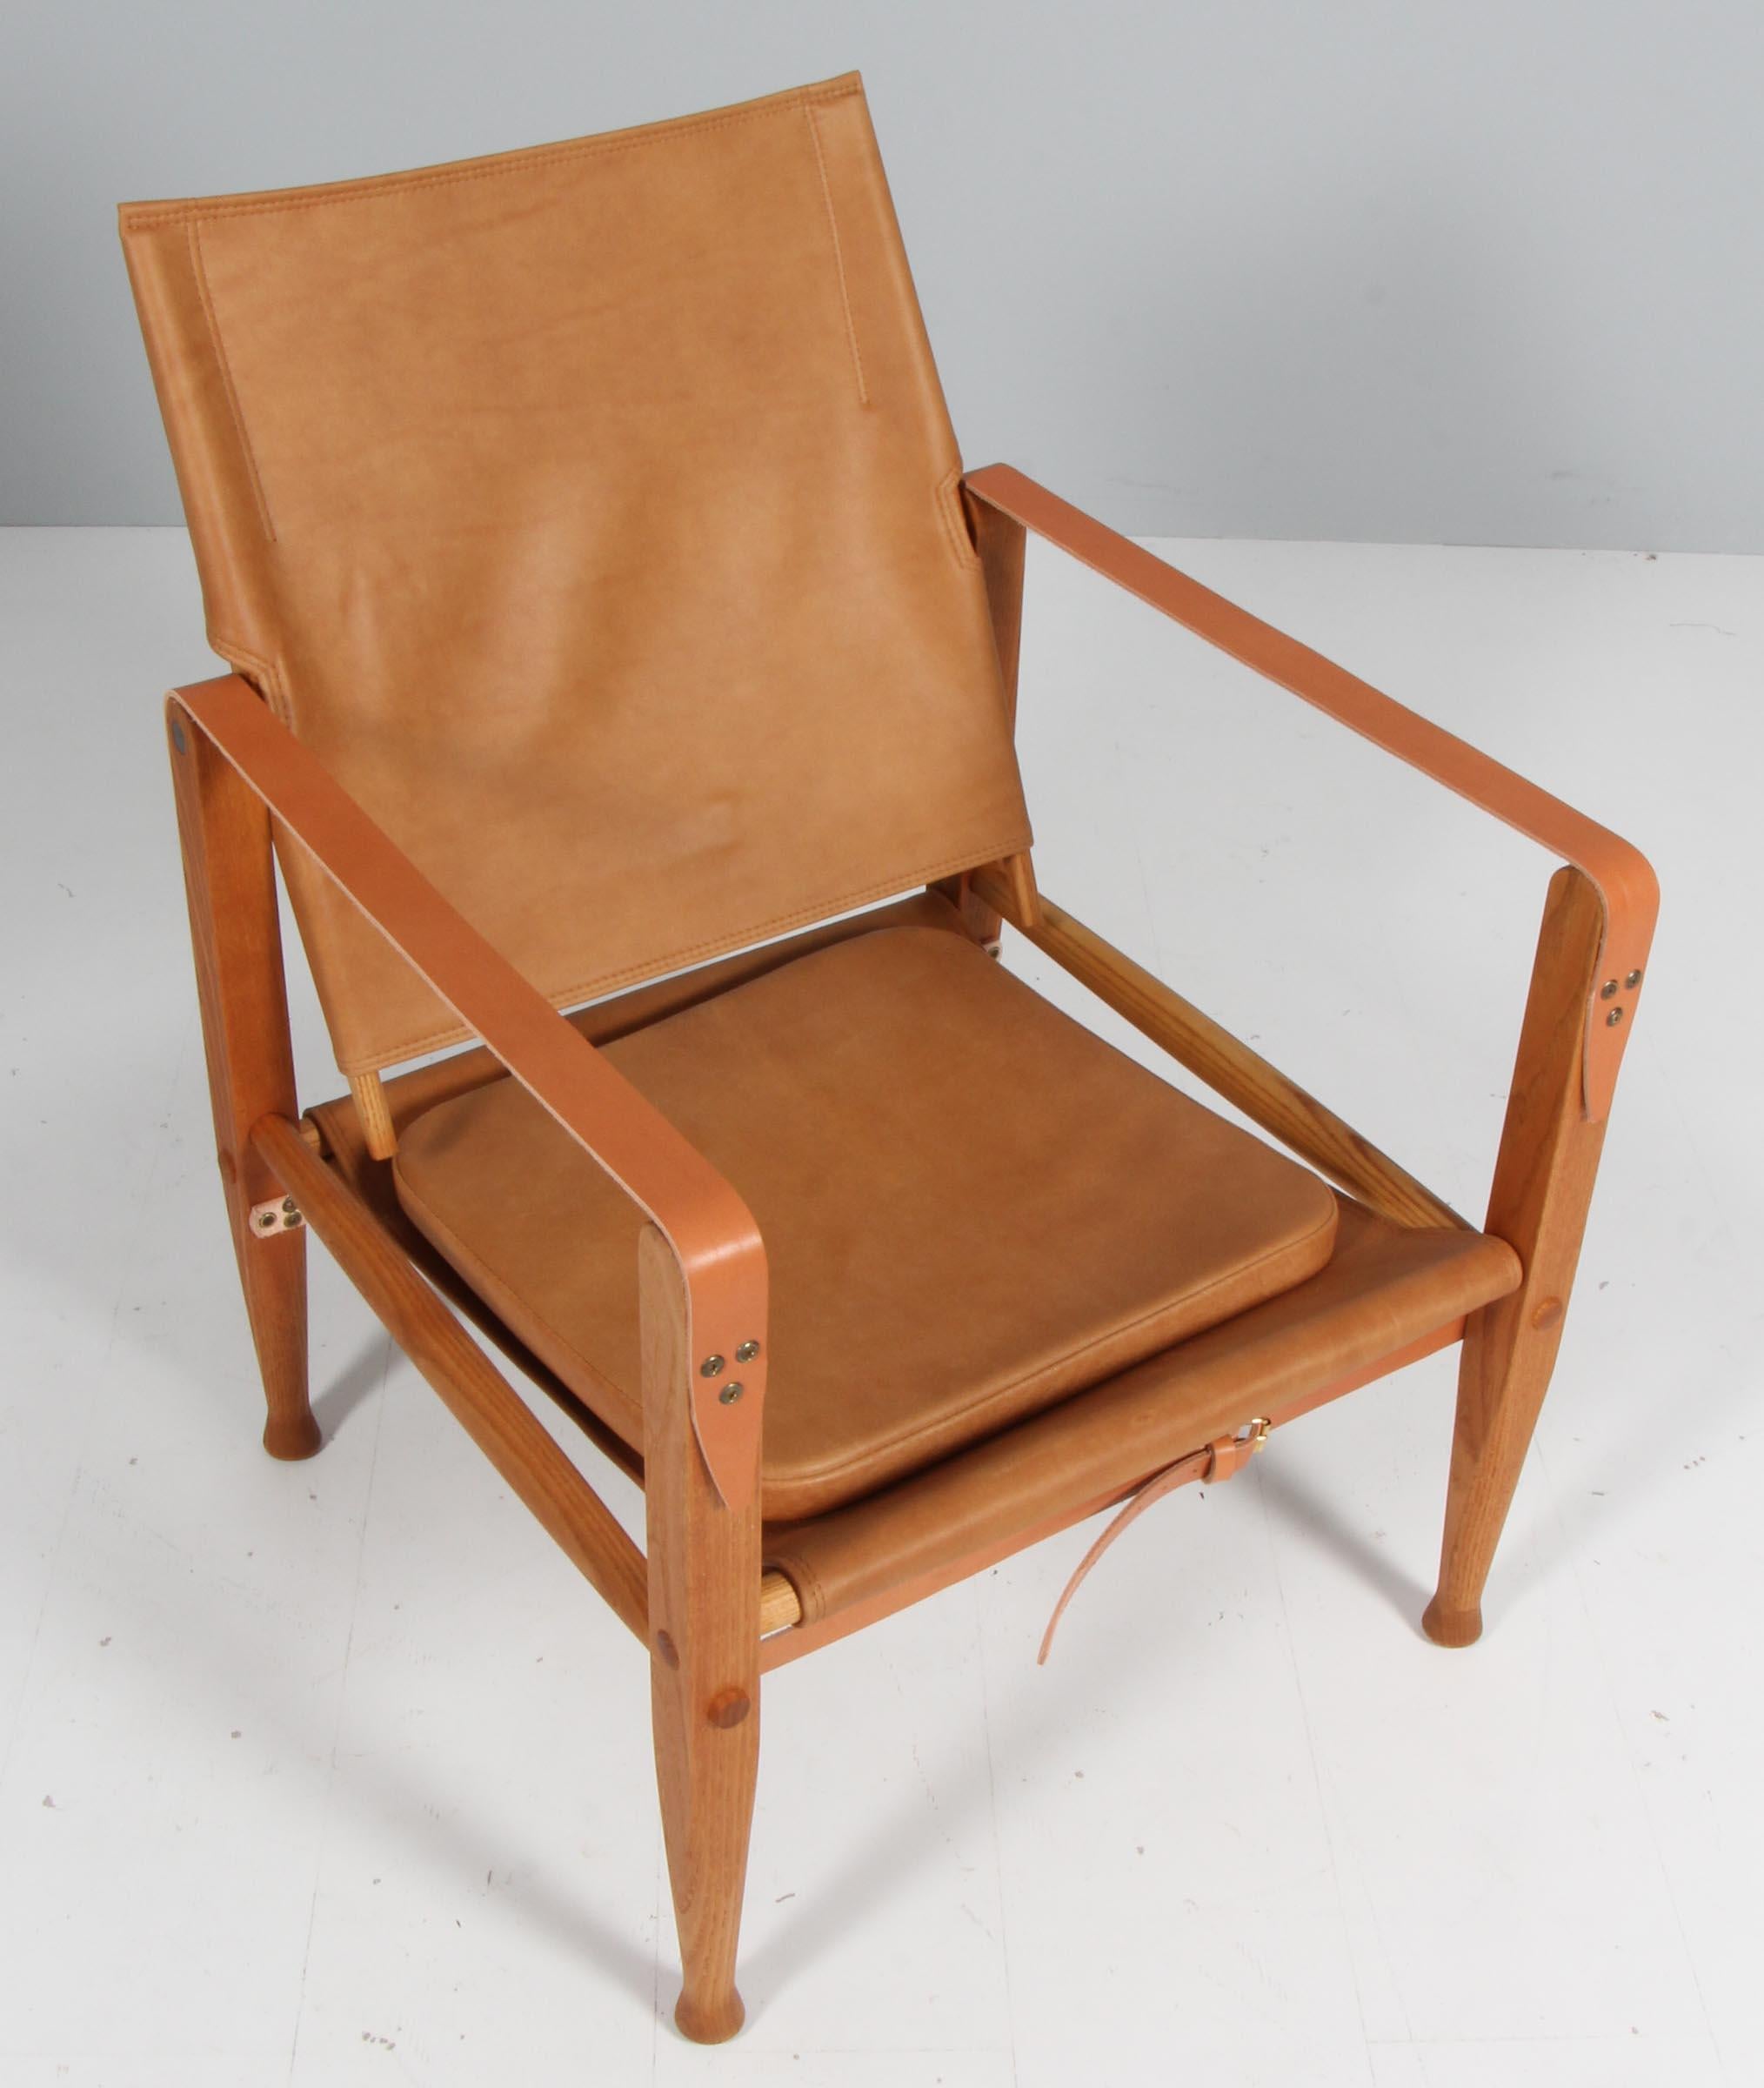 Kaare Klint for Rud Rasmussen, Safari Chair with ottoman In Excellent Condition For Sale In Esbjerg, DK